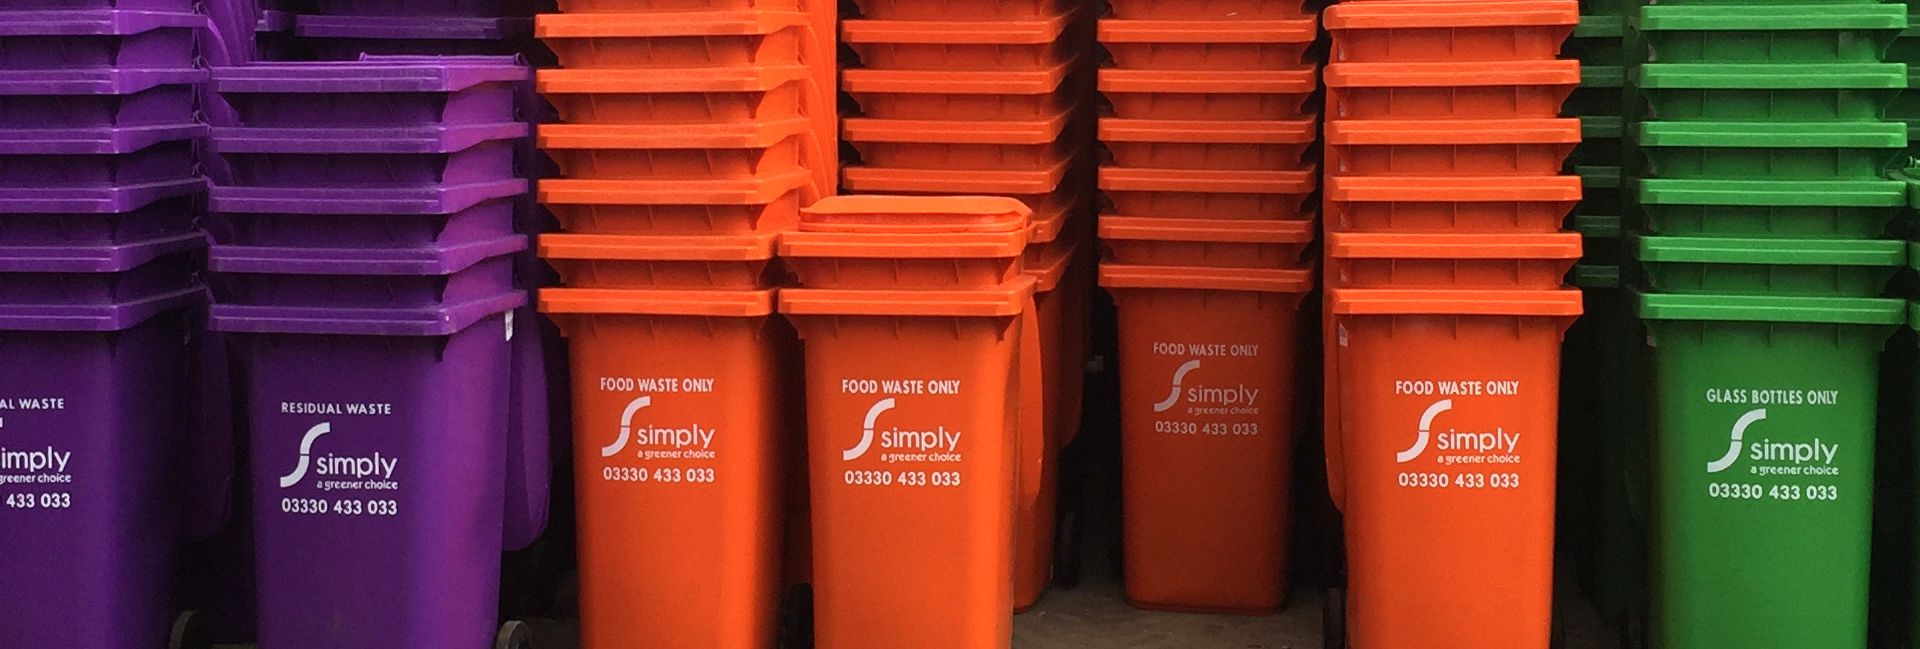 Our Colour Coded Bins